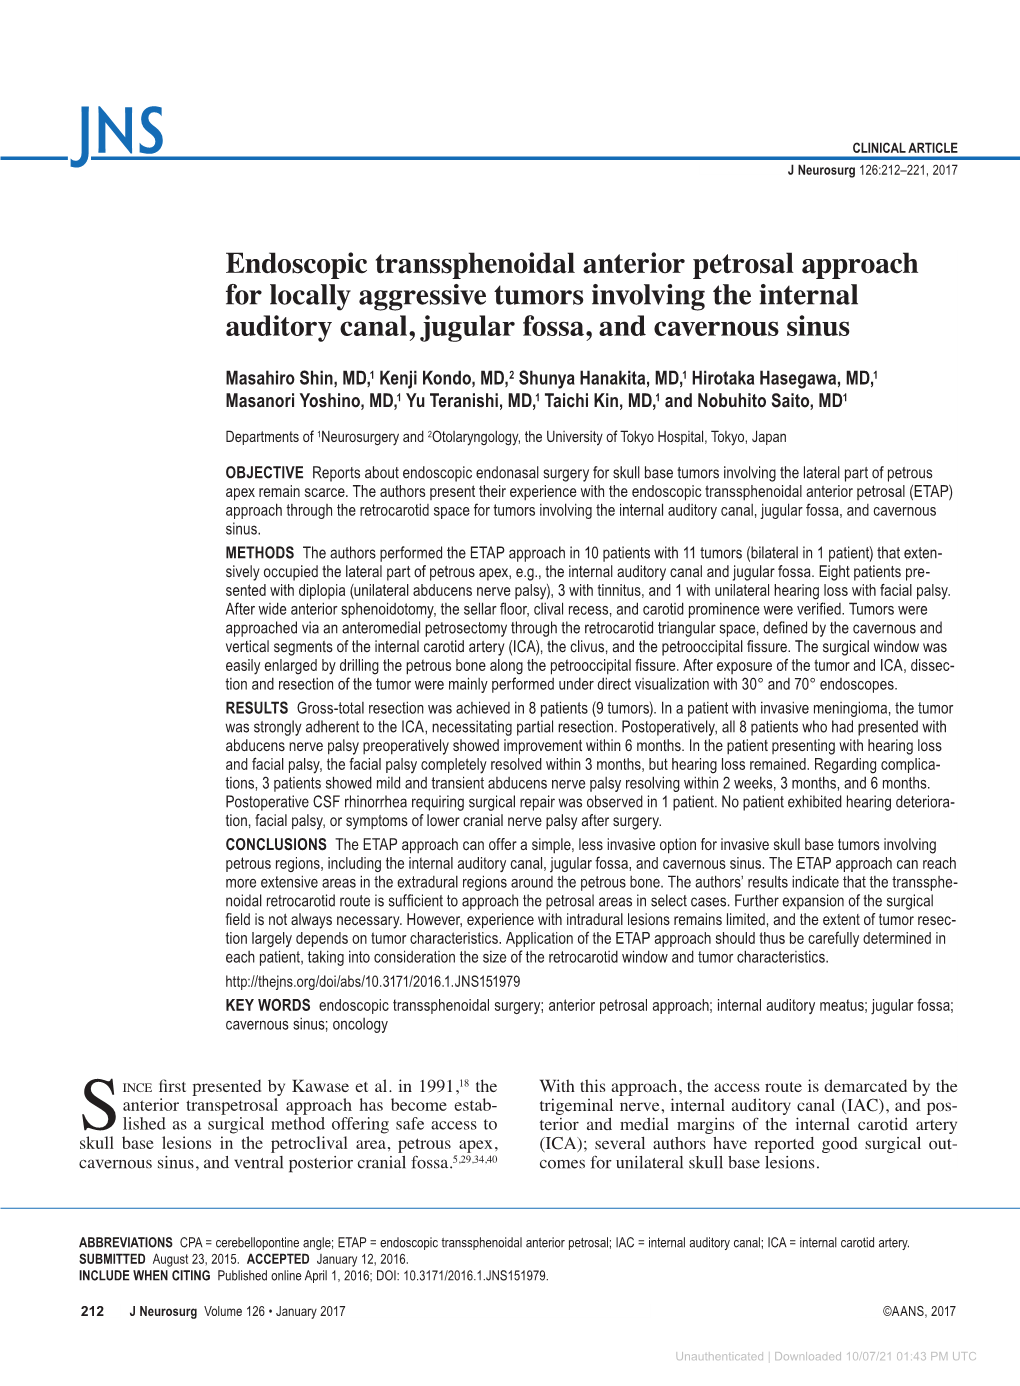 Endoscopic Transsphenoidal Anterior Petrosal Approach for Locally Aggressive Tumors Involving the Internal Auditory Canal, Jugular Fossa, and Cavernous Sinus